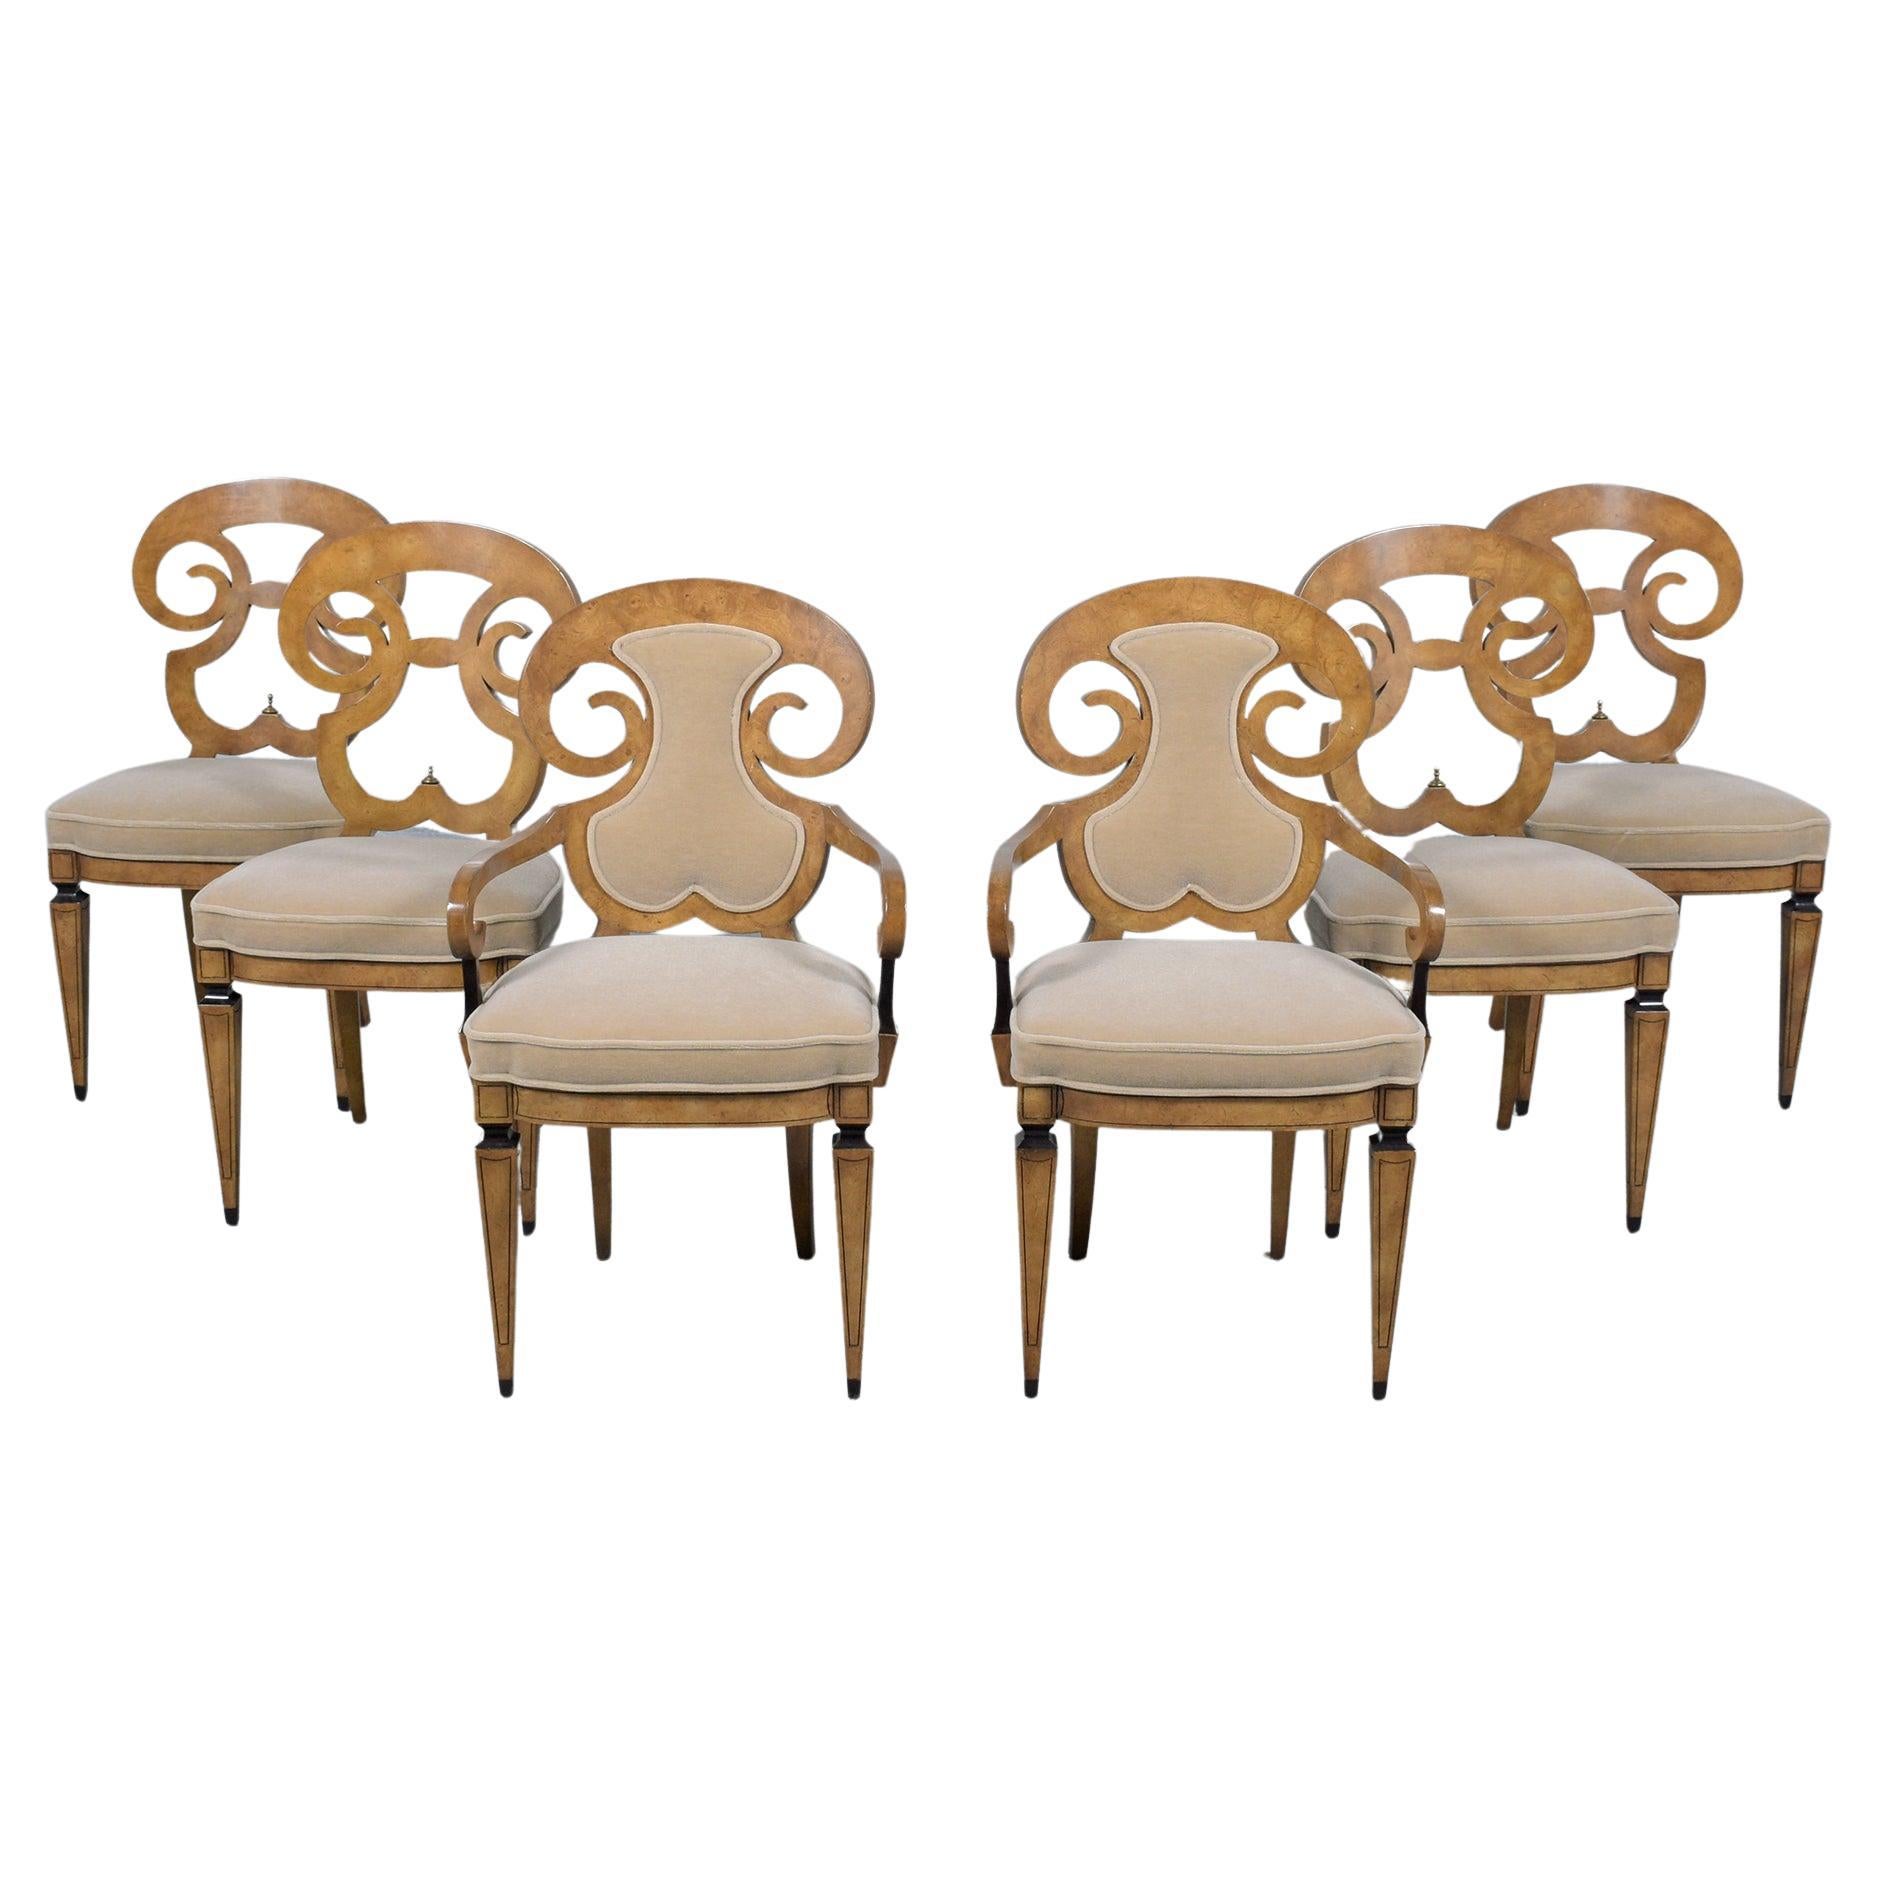 Renzo Rutili for Johnson Furniture: Restored Mid-Century Maple Dining Chair Set For Sale